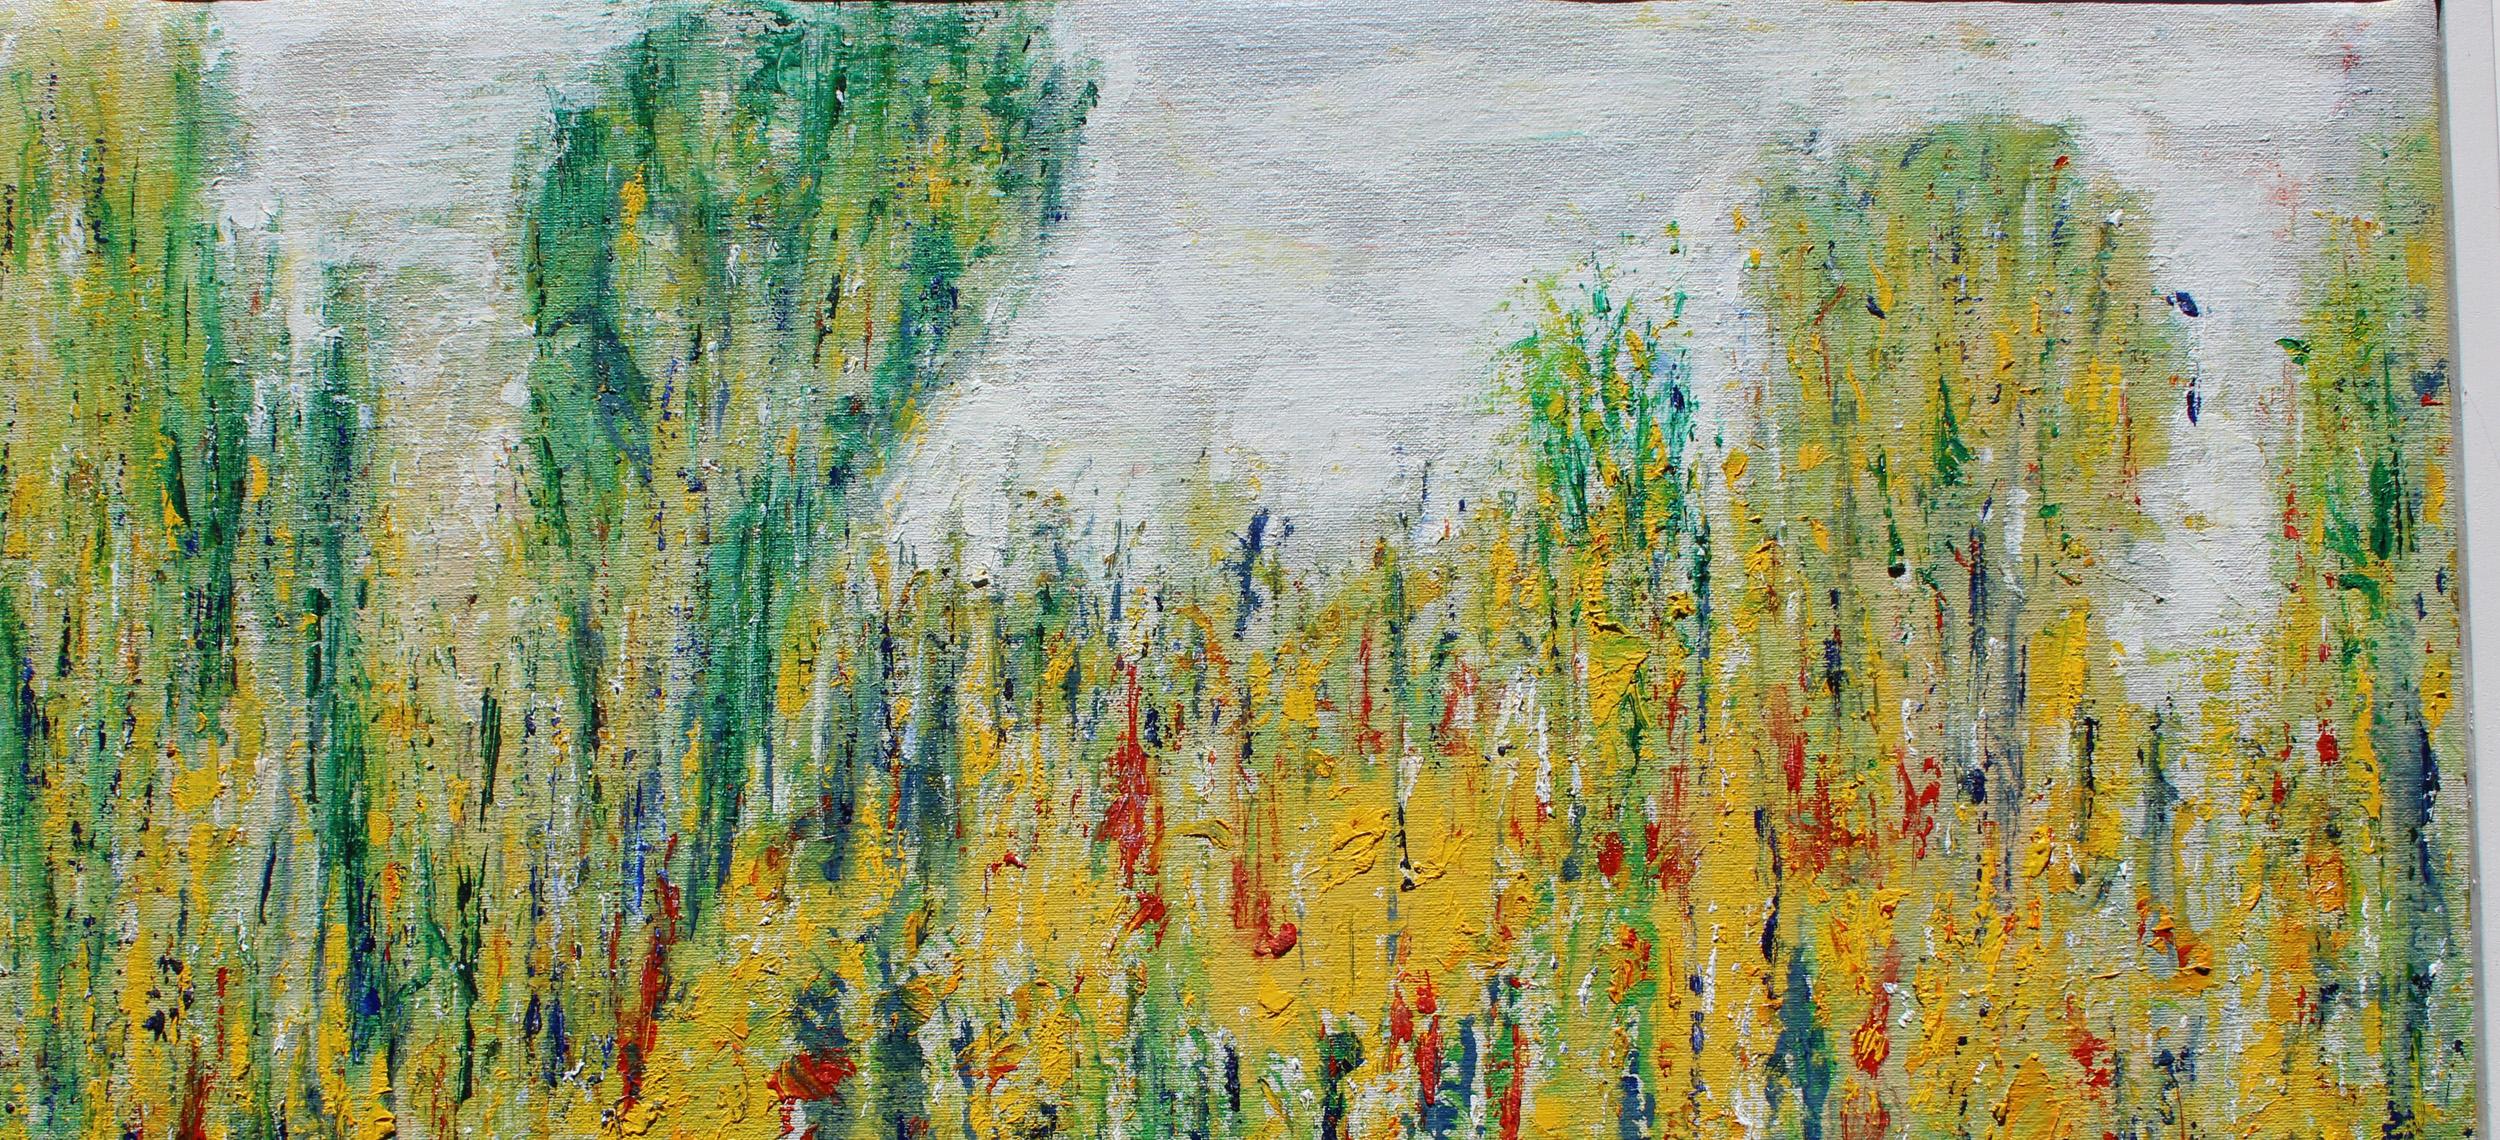 Abstract Landscape, Woodstock, NY. - Abstract Expressionist Painting by Arthur Pinajian